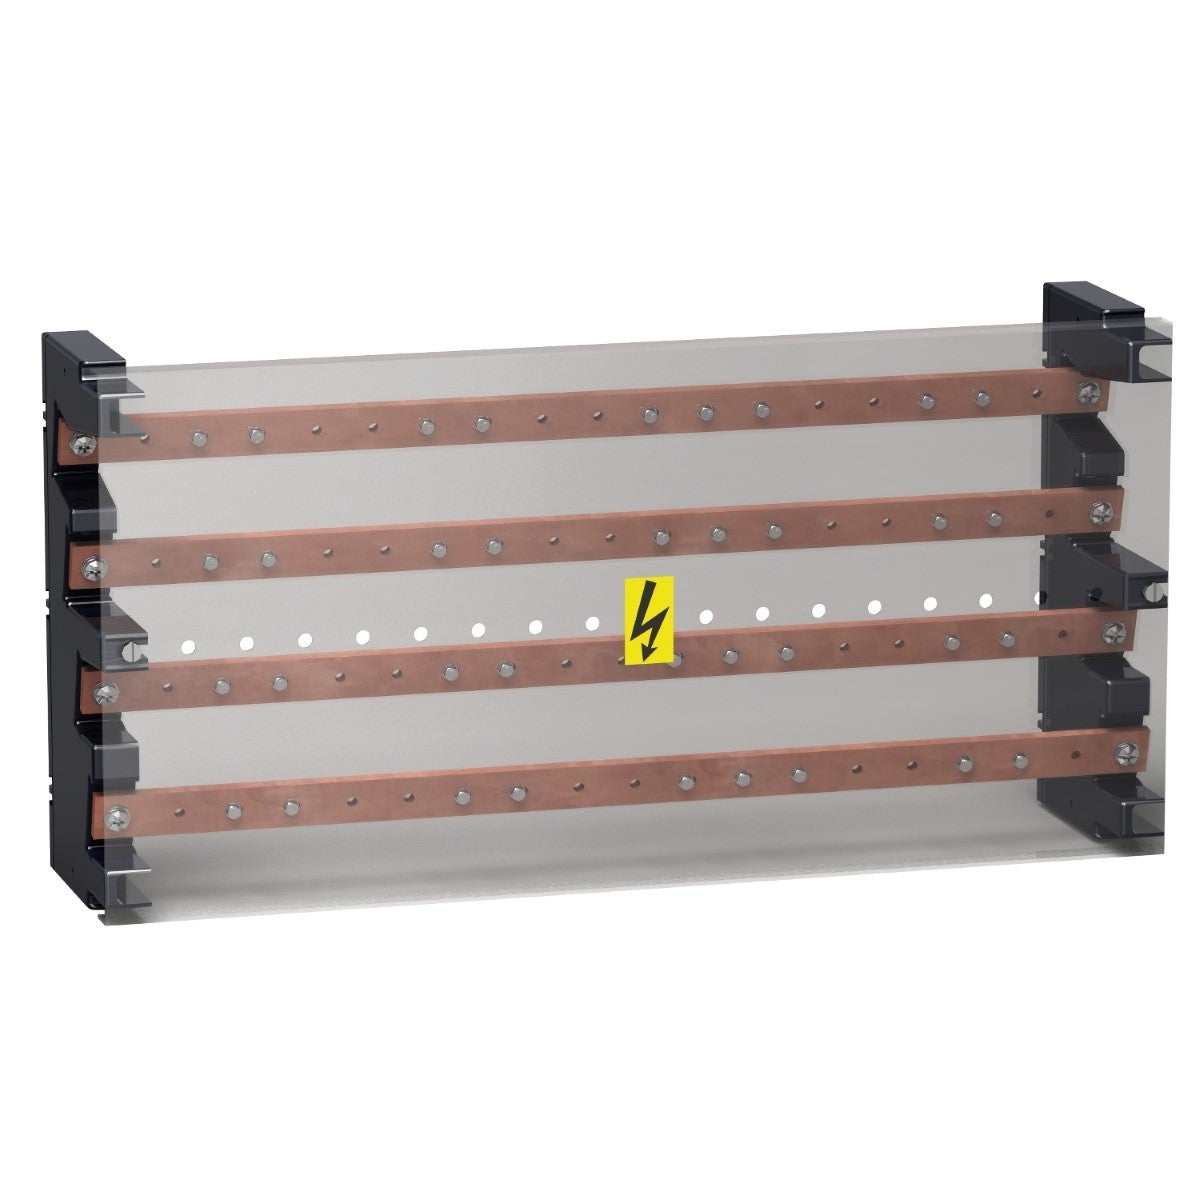 Multi-stage distribution block, LINERGY BS, 4P Multistage Busbar 250A 52holes